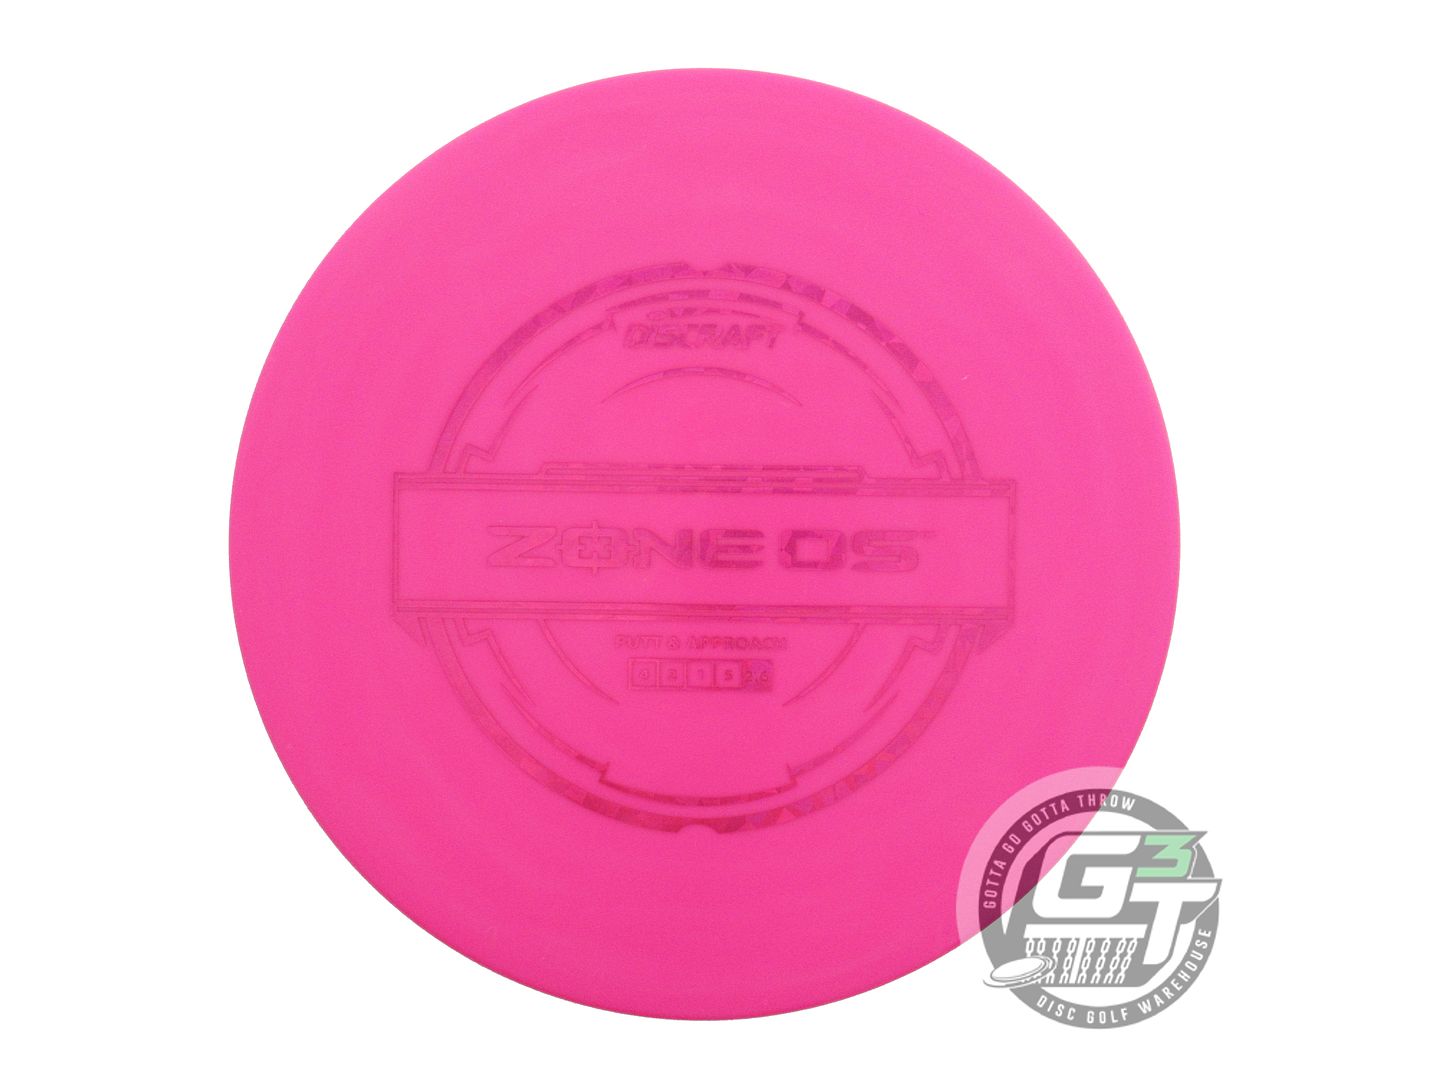 Discraft Putter Line Zone OS Putter Golf Disc (Individually Listed)